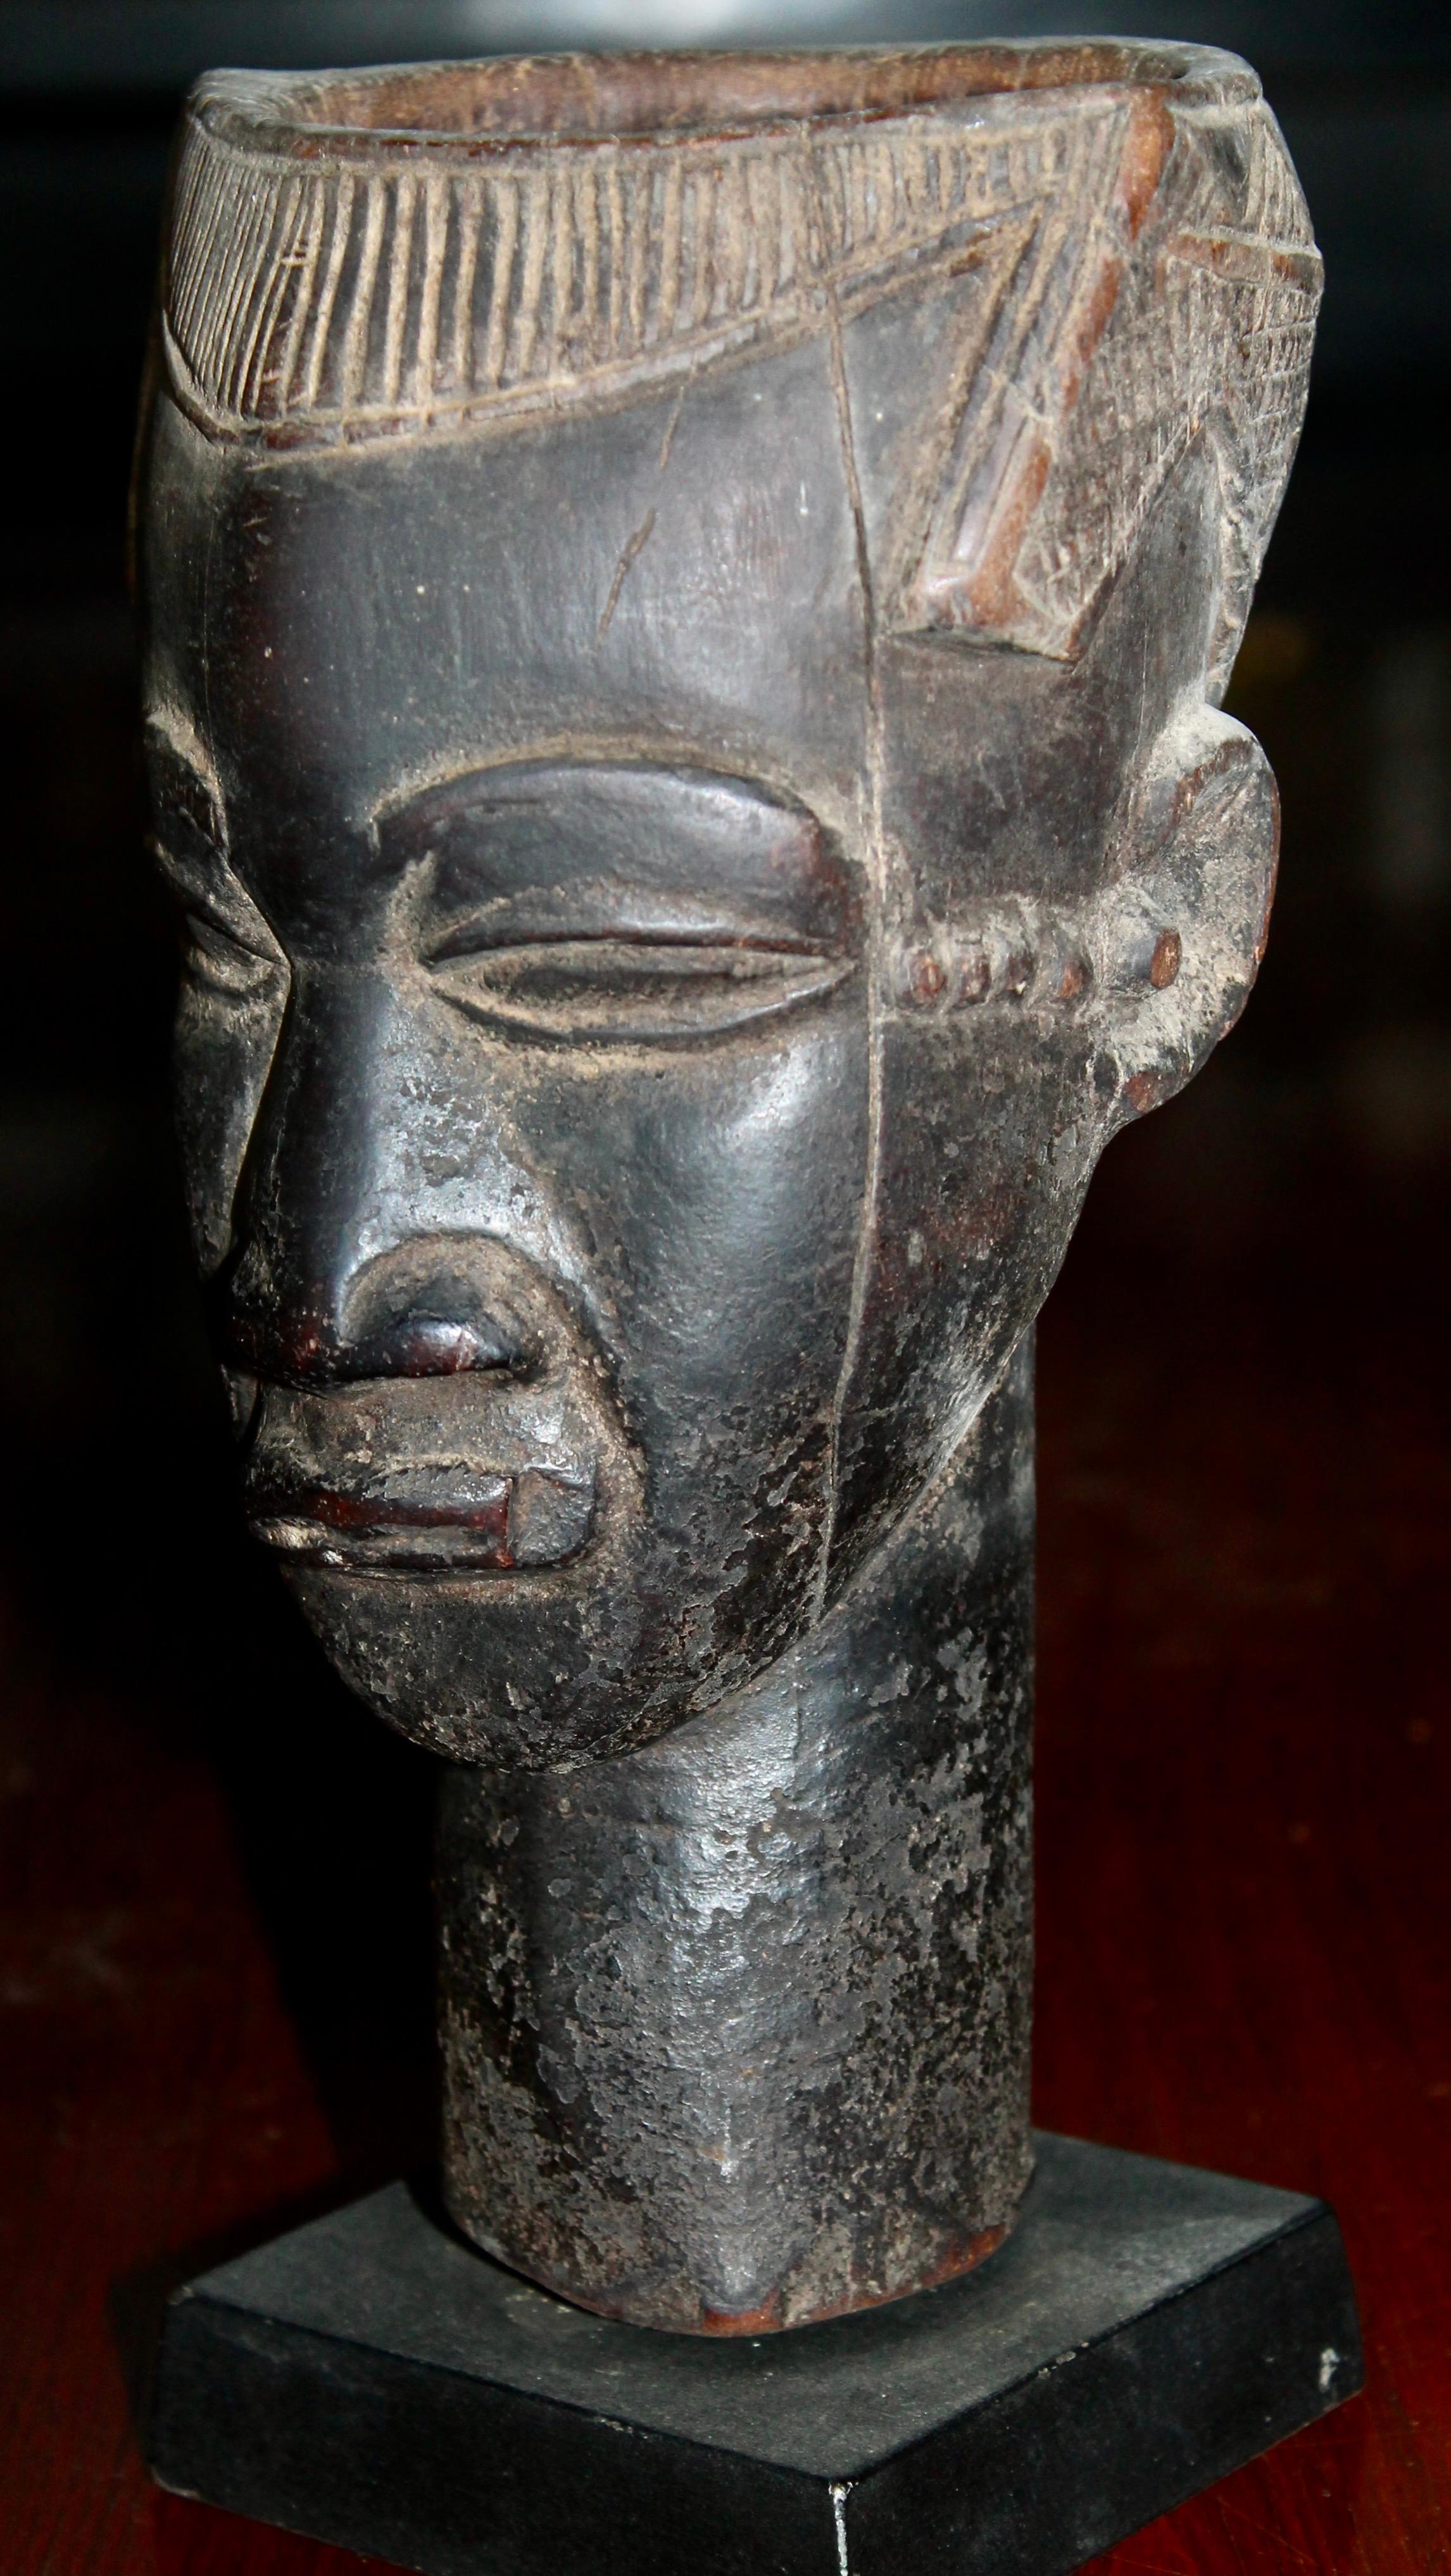 A Kuba Head as a cup. Rich dark patina. Mount included. From The Late Bryce Holcombe Collection. Bryce was the founding director of Pace Primitive, and a personal friend.